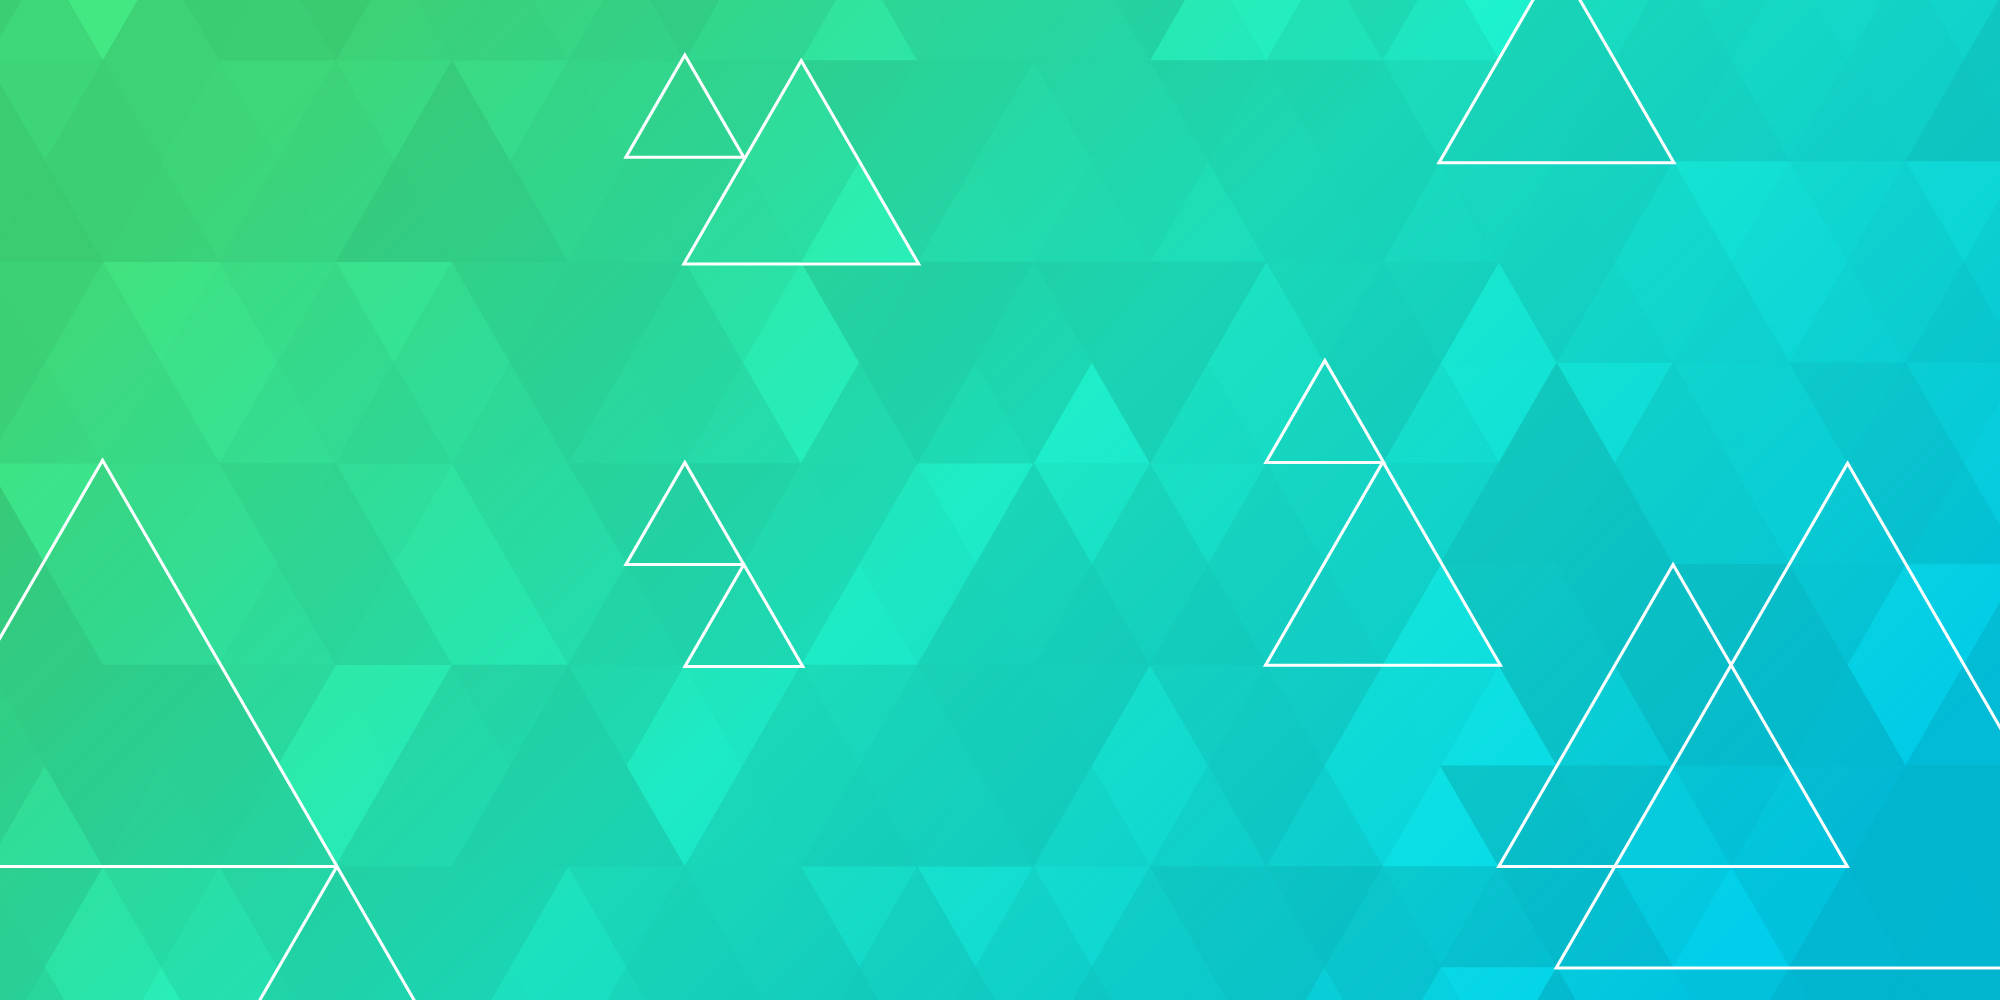 Blue green and teal triangular pattern